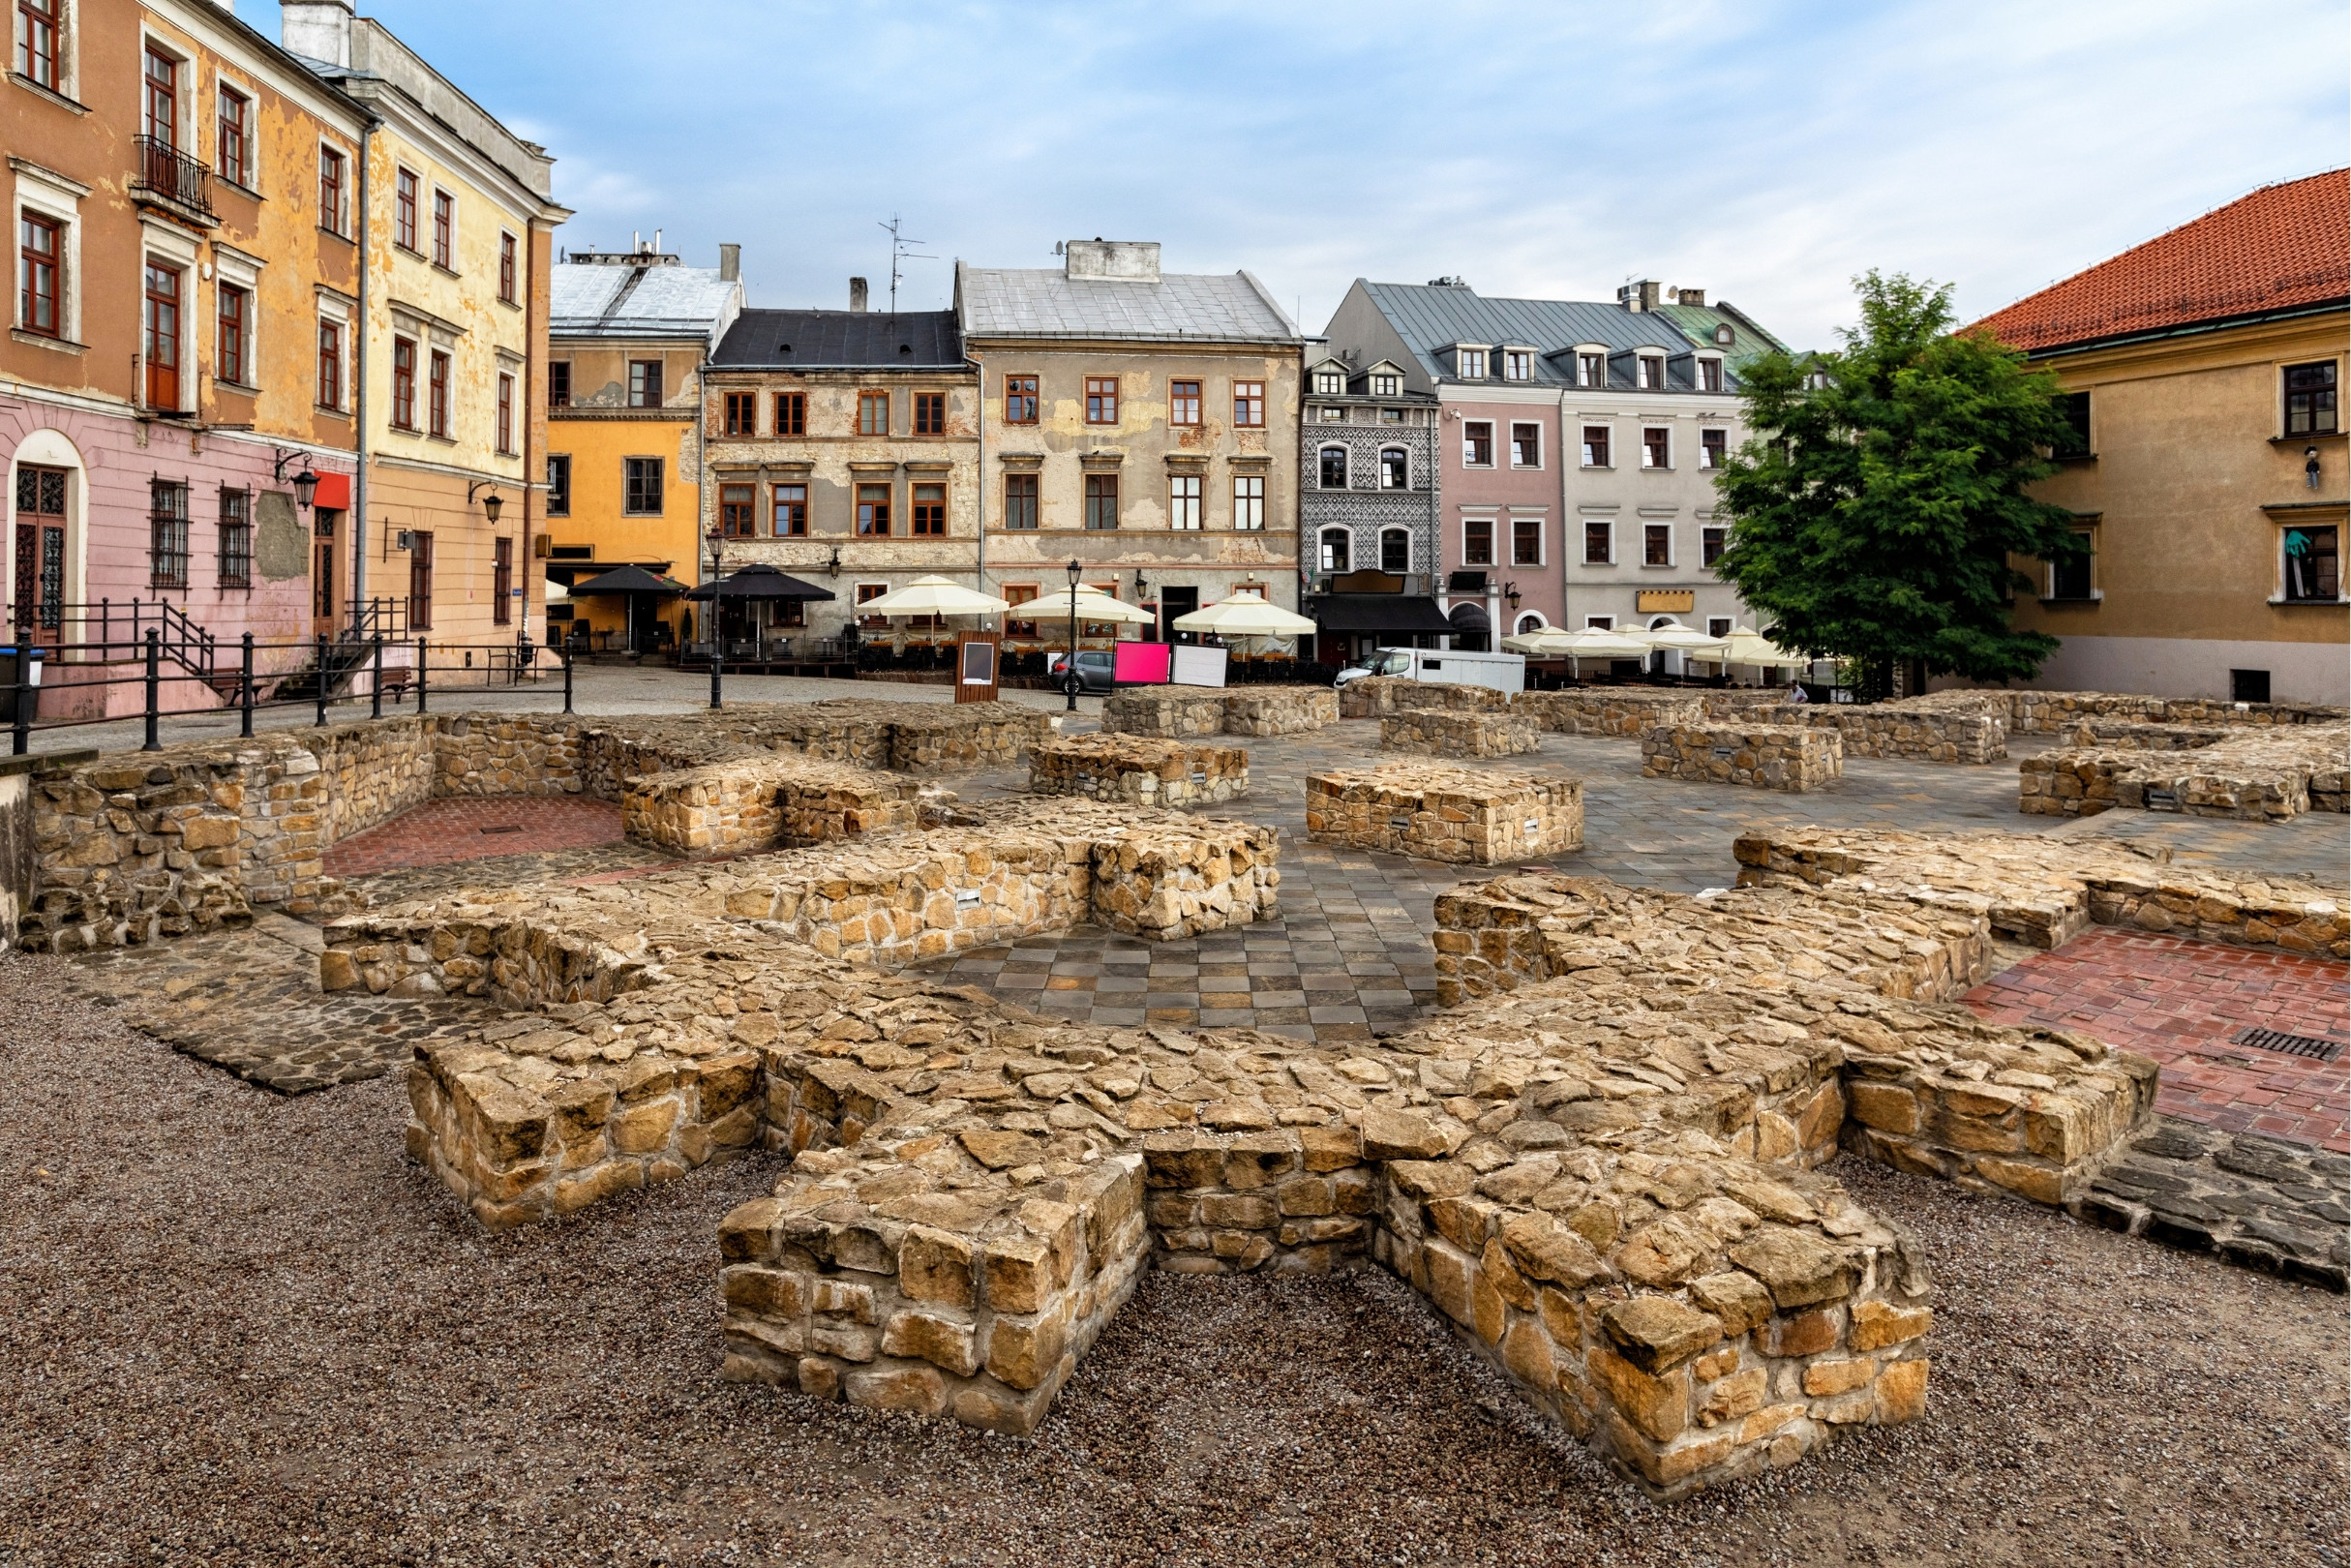 Best Sights in Lublin, Poland